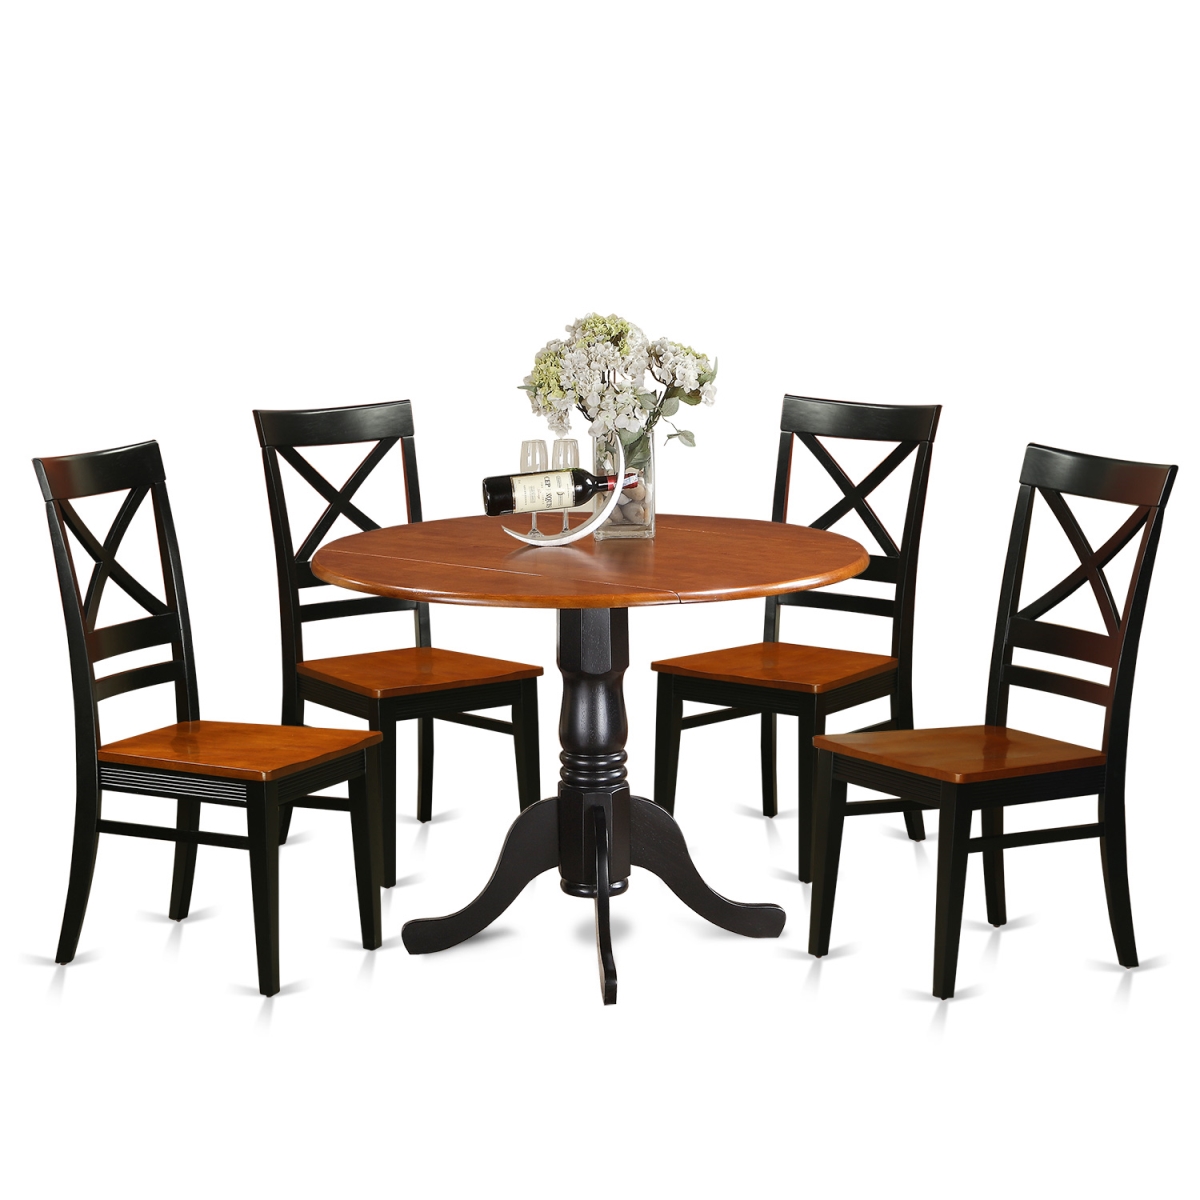 Picture of East West Furniture DLQU5-BCH-W Wood Seat Dublin Kitchen Table Set - Dining Table & 4 Wooden Chairs, Black & Cherry - 5 Piece